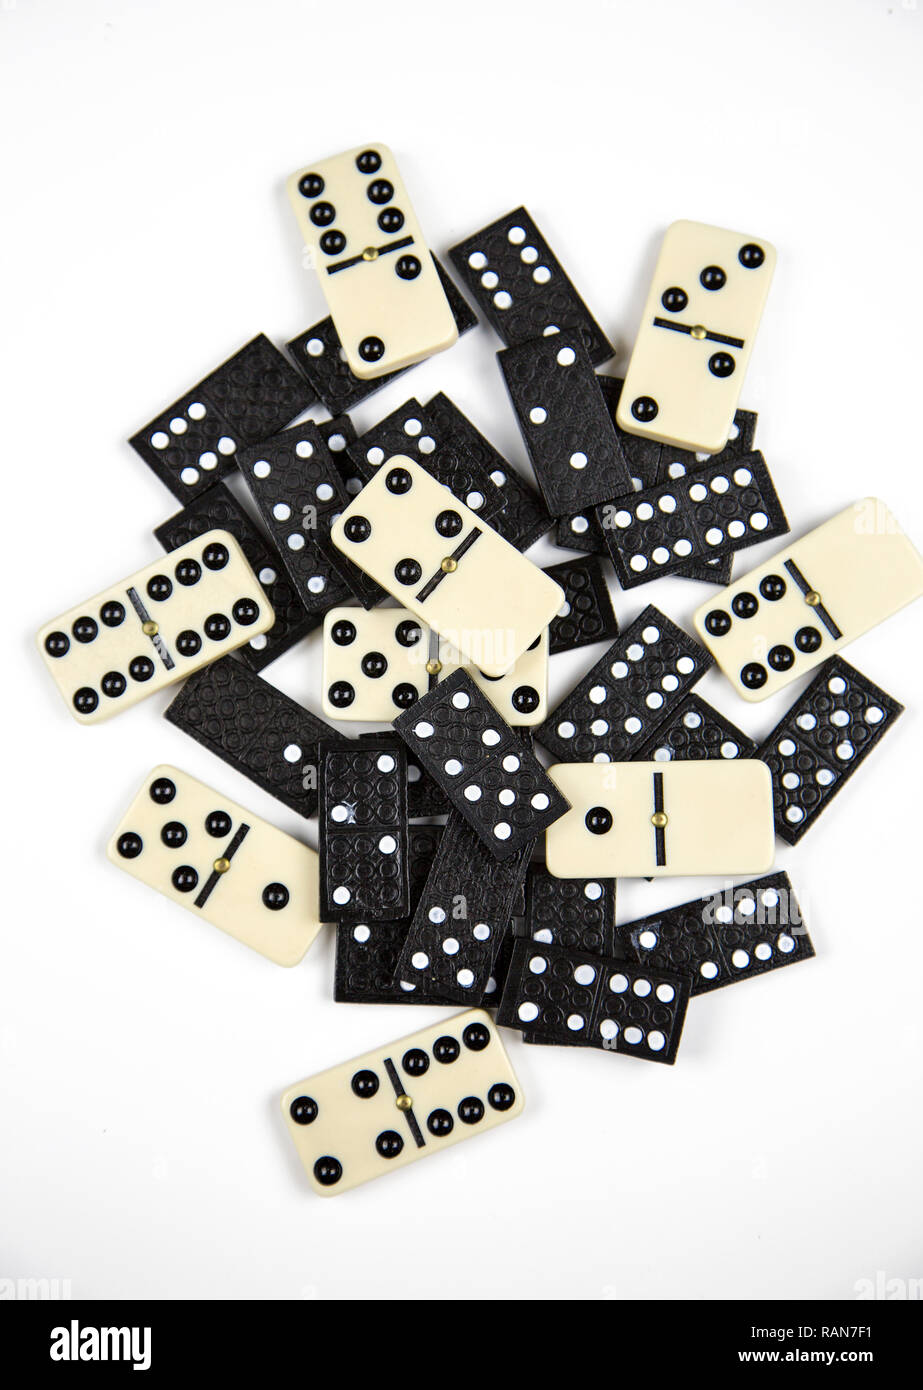 Domino Tiles Strategy Game Stones. Dominoes is a family of tile-based games  played with rectangular "domino" tiles. Each domino is a rectangular tile  Stock Photo - Alamy